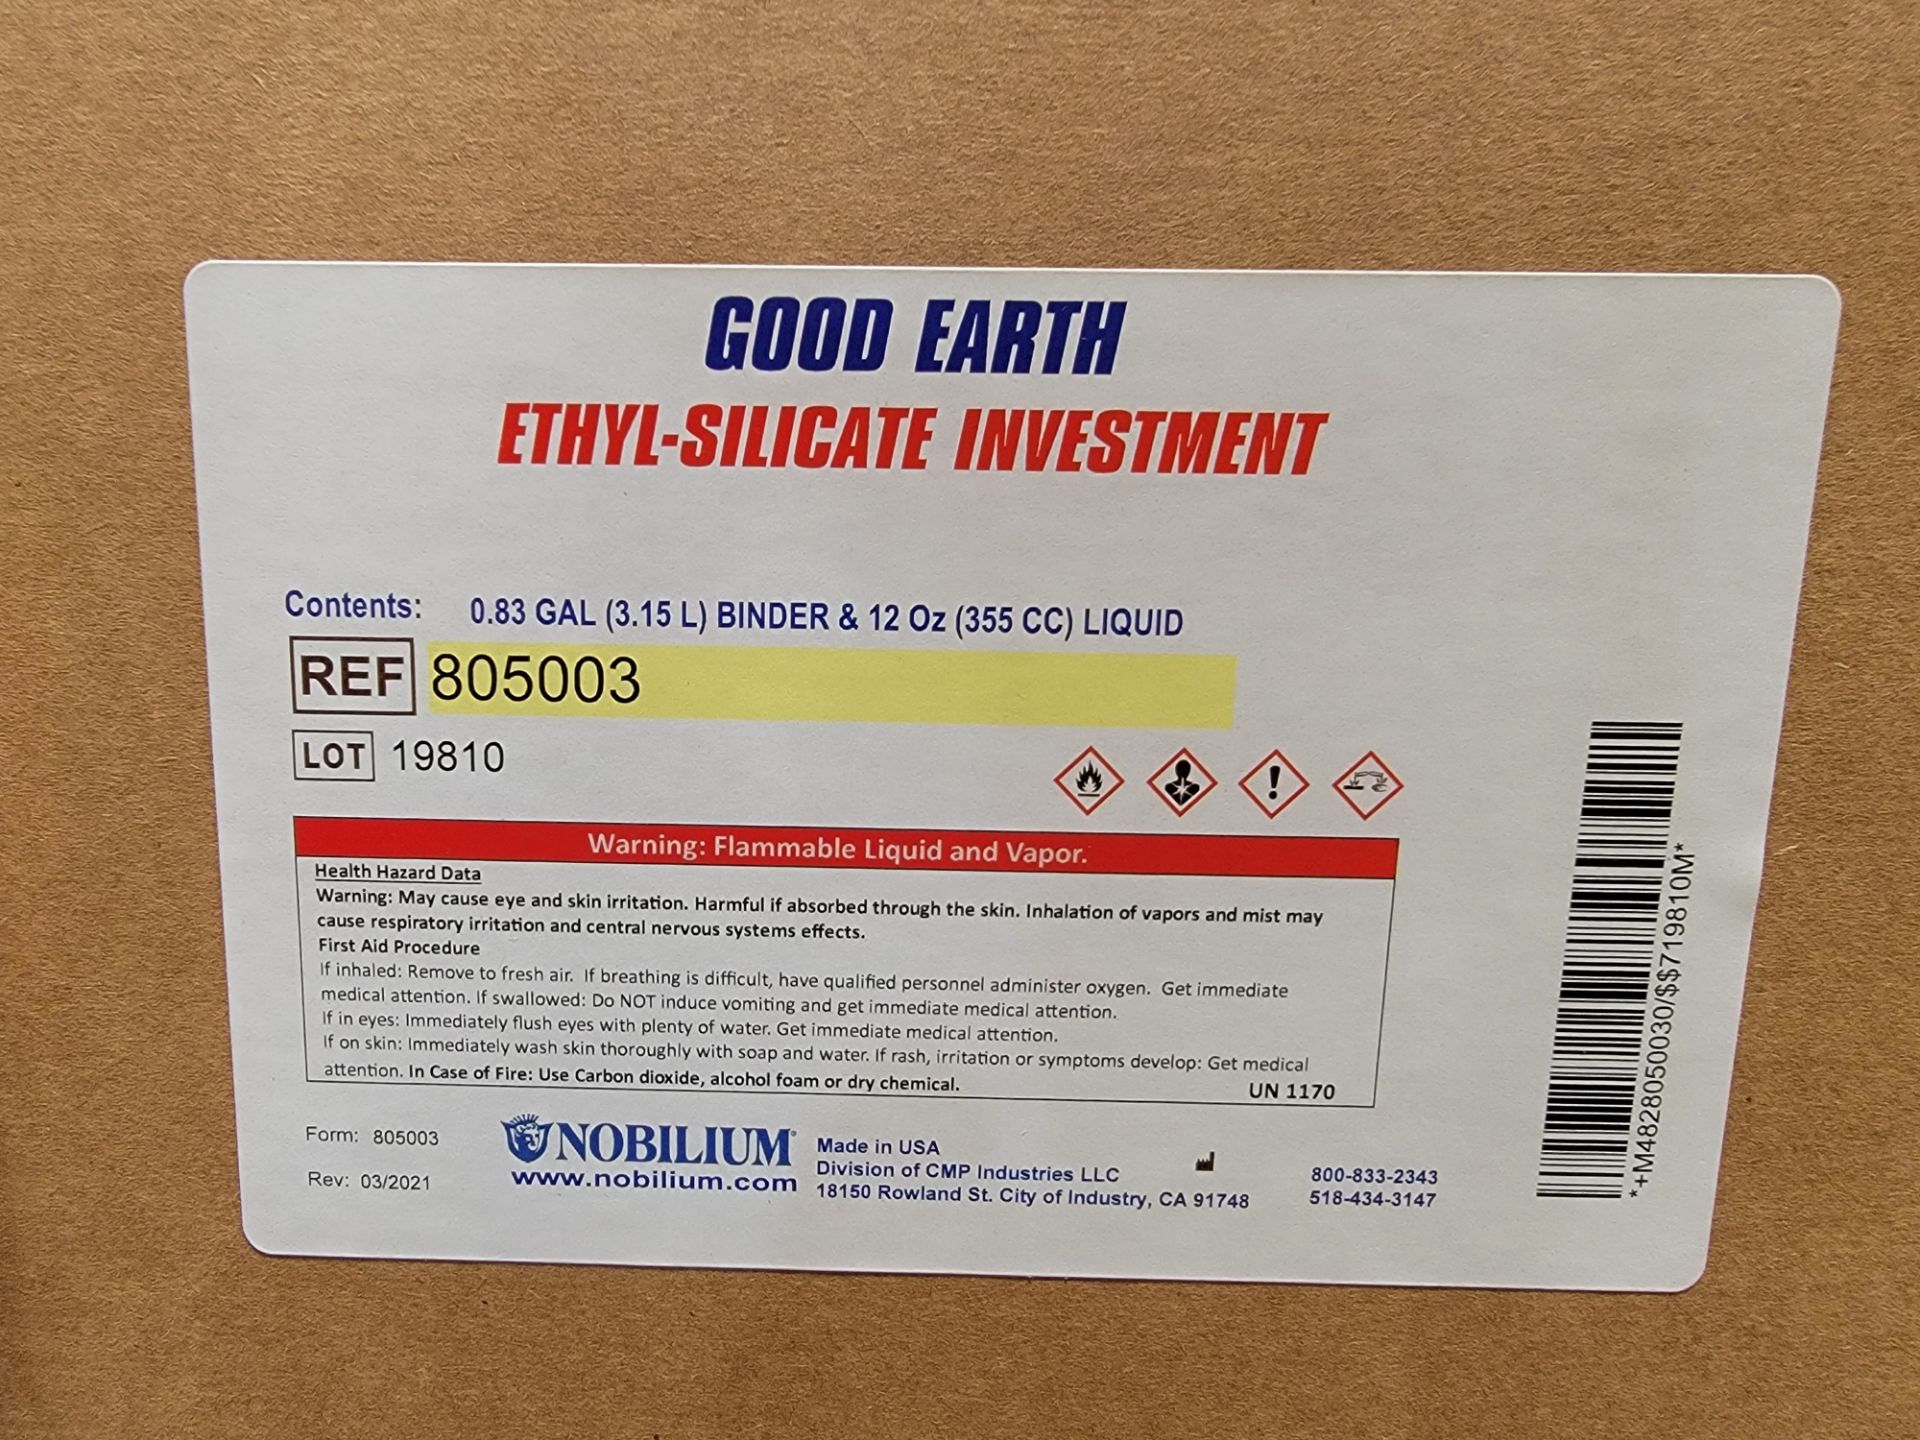 GOOD EARTH ETHYL SILICATE INVESTMENT REF 805003 - Image 3 of 4